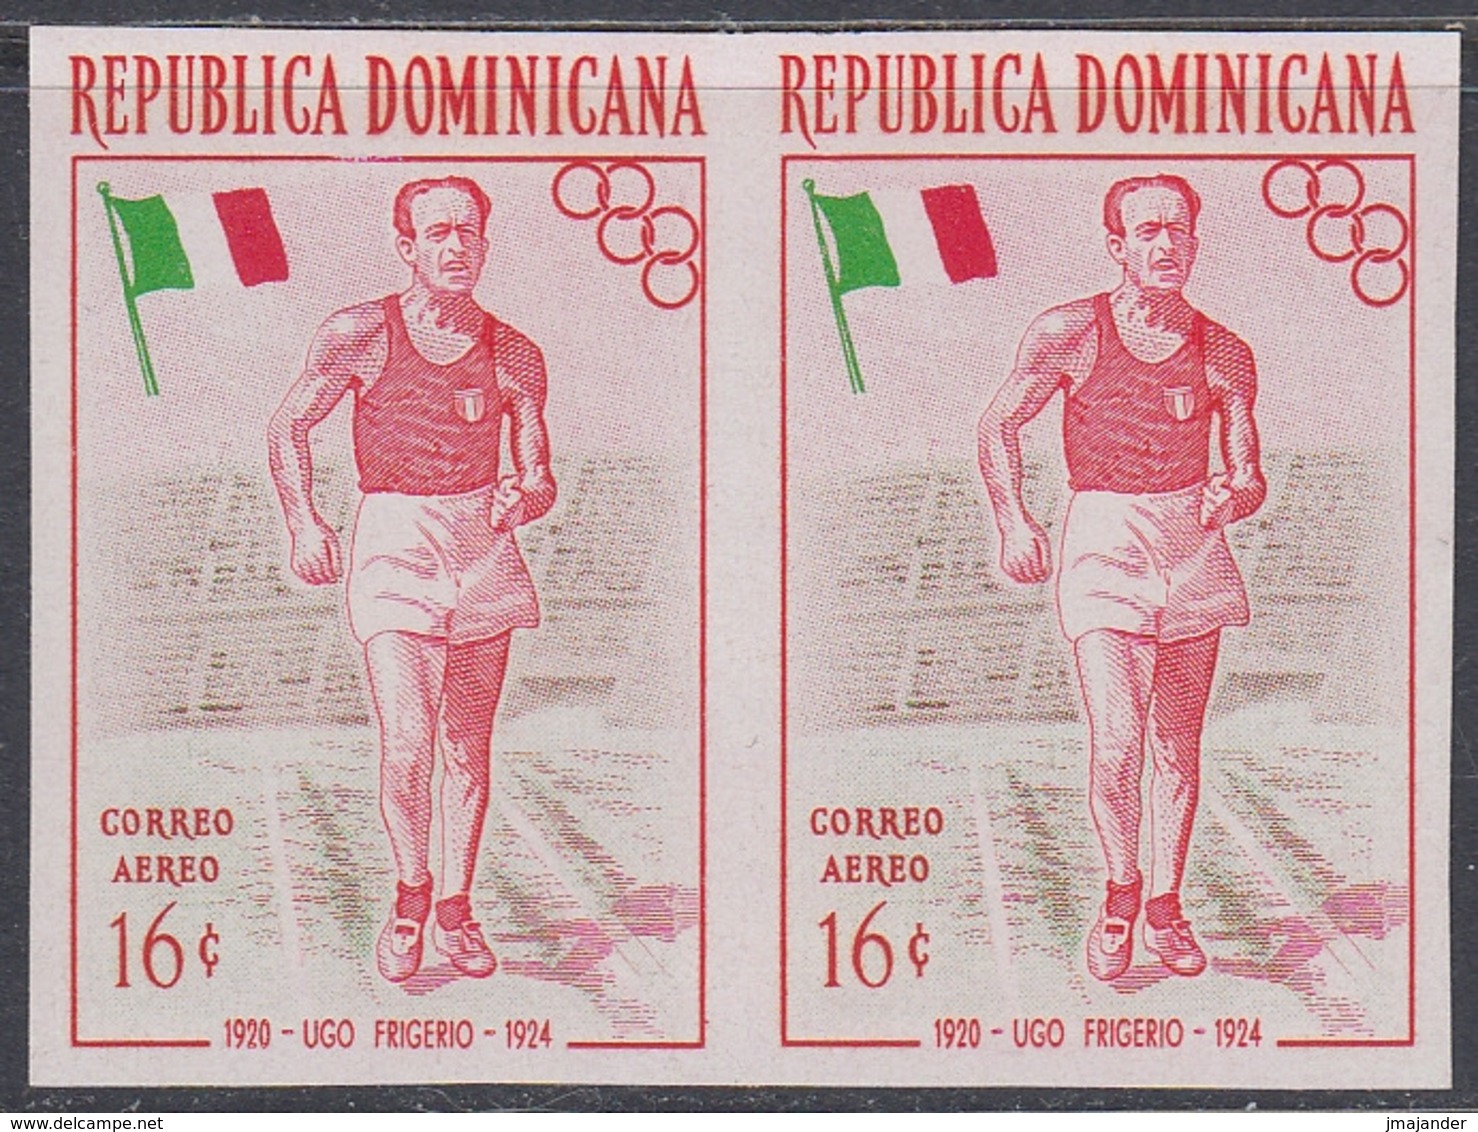 Dominican Republic 1957 - Olympic Games In Melbourne: Frigerio, Race Walking, Athletics - Imperforate Pair Mi 566 ** MNH - Verano 1956: Melbourne